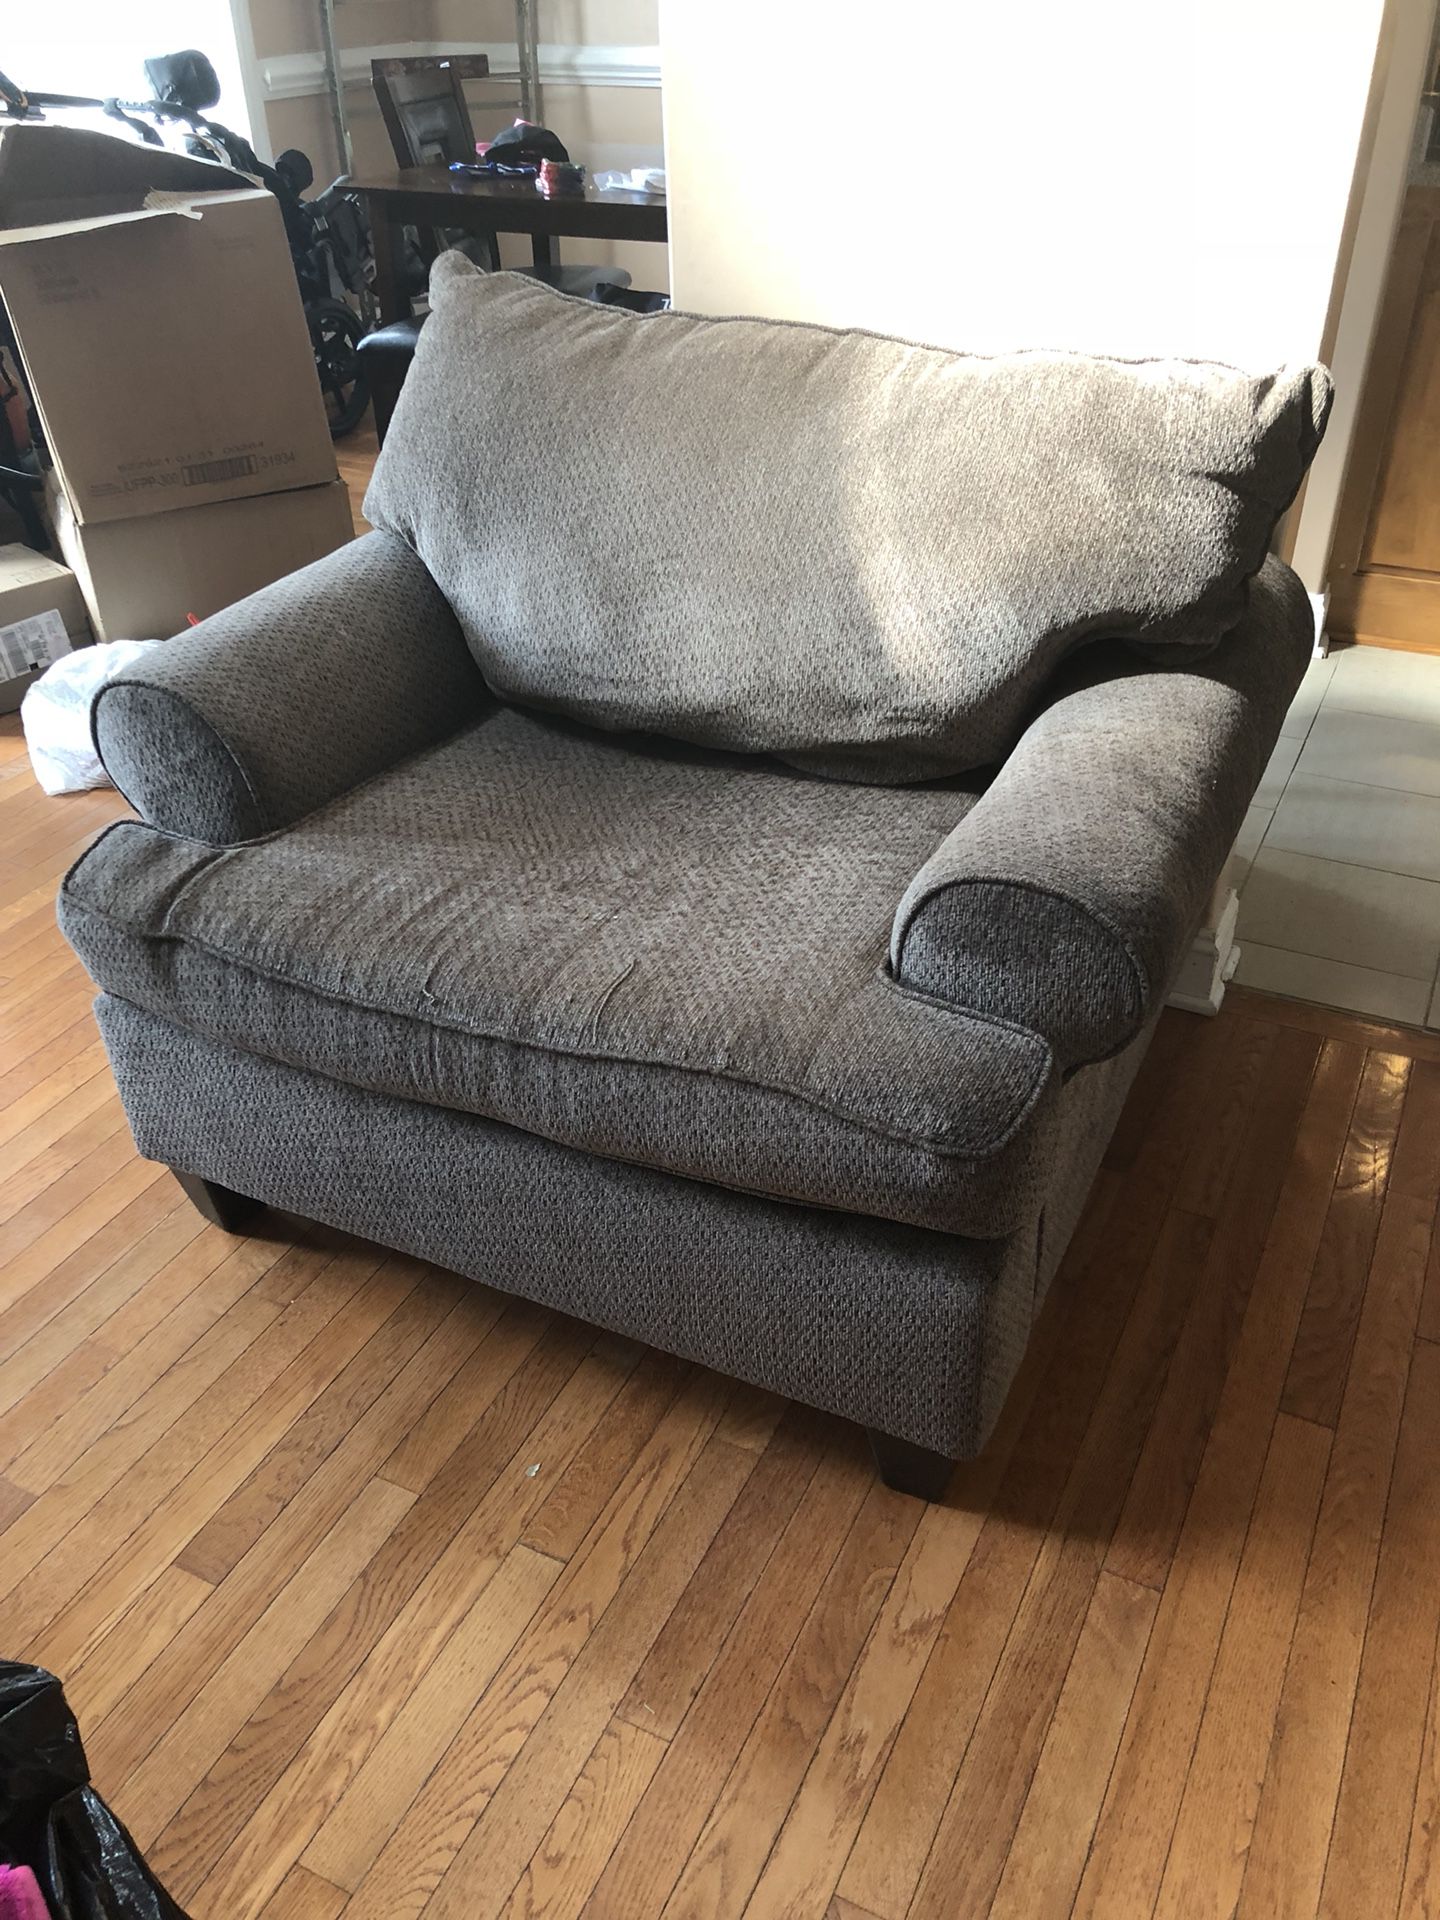 Large comfy chair